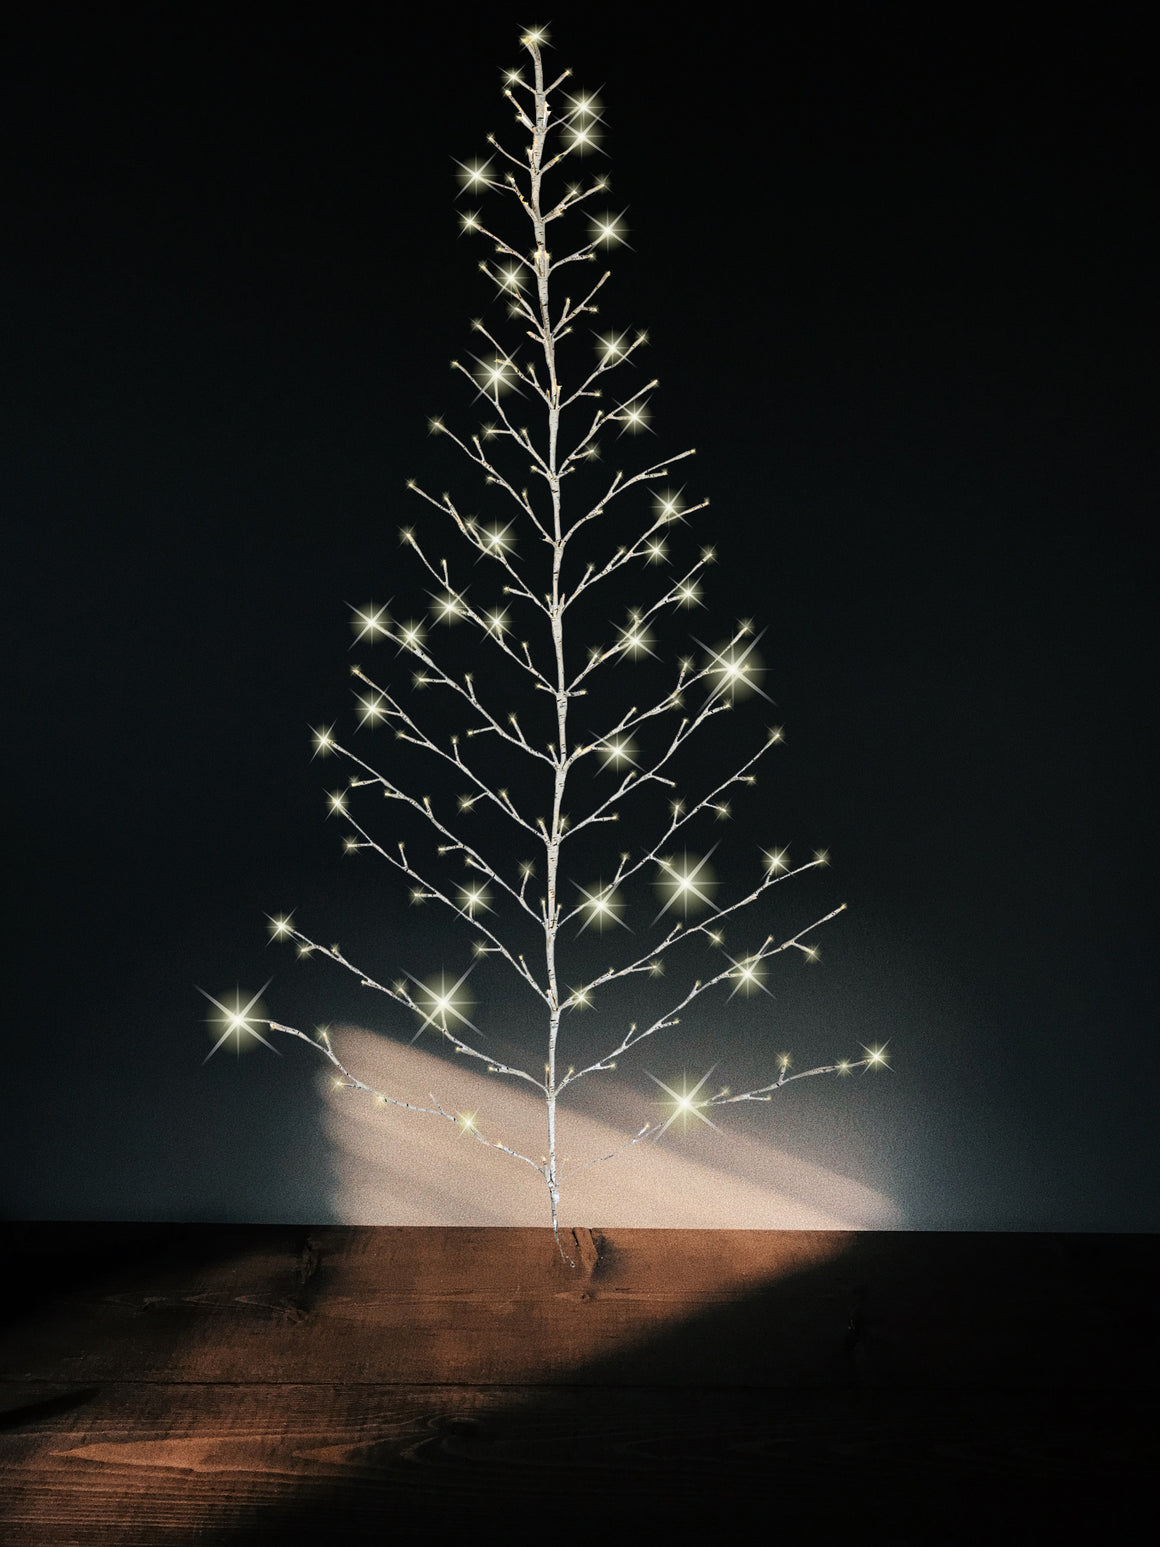 Lighted White Birch Christmas Wall Tree - Indoor/Outdoor LED 6 Feet High - Warm White Lights - Battery Operated with Timer, White Branches